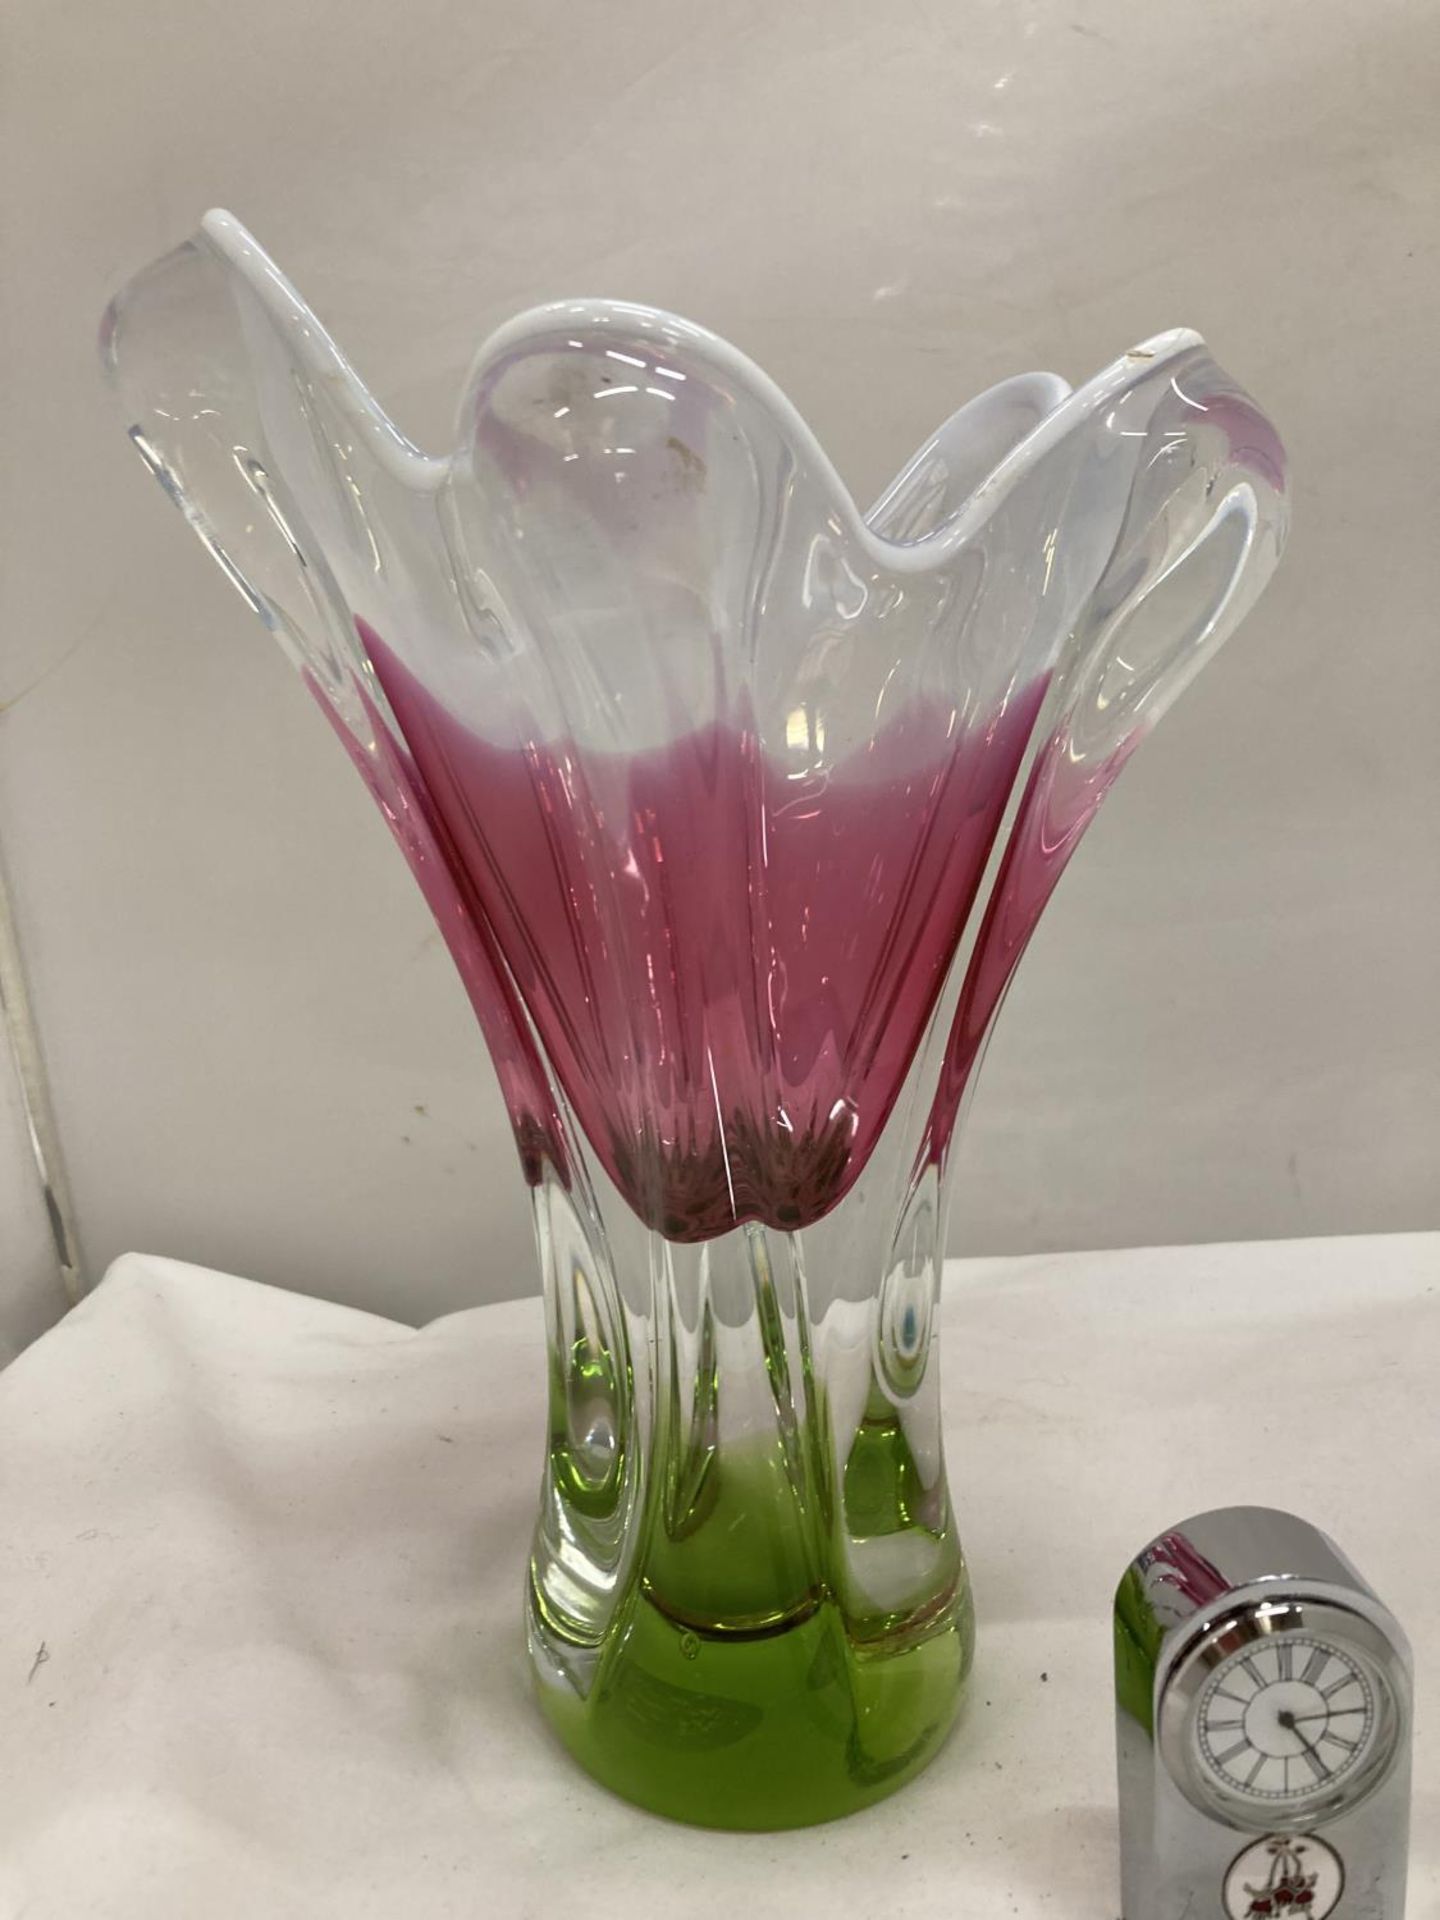 A MURANO STYLE HEAVY ART GLASS VASE WITH GRADUATING COLOURS OF GREEN, CRANBERRY AND ACID WHITE - - Image 3 of 17